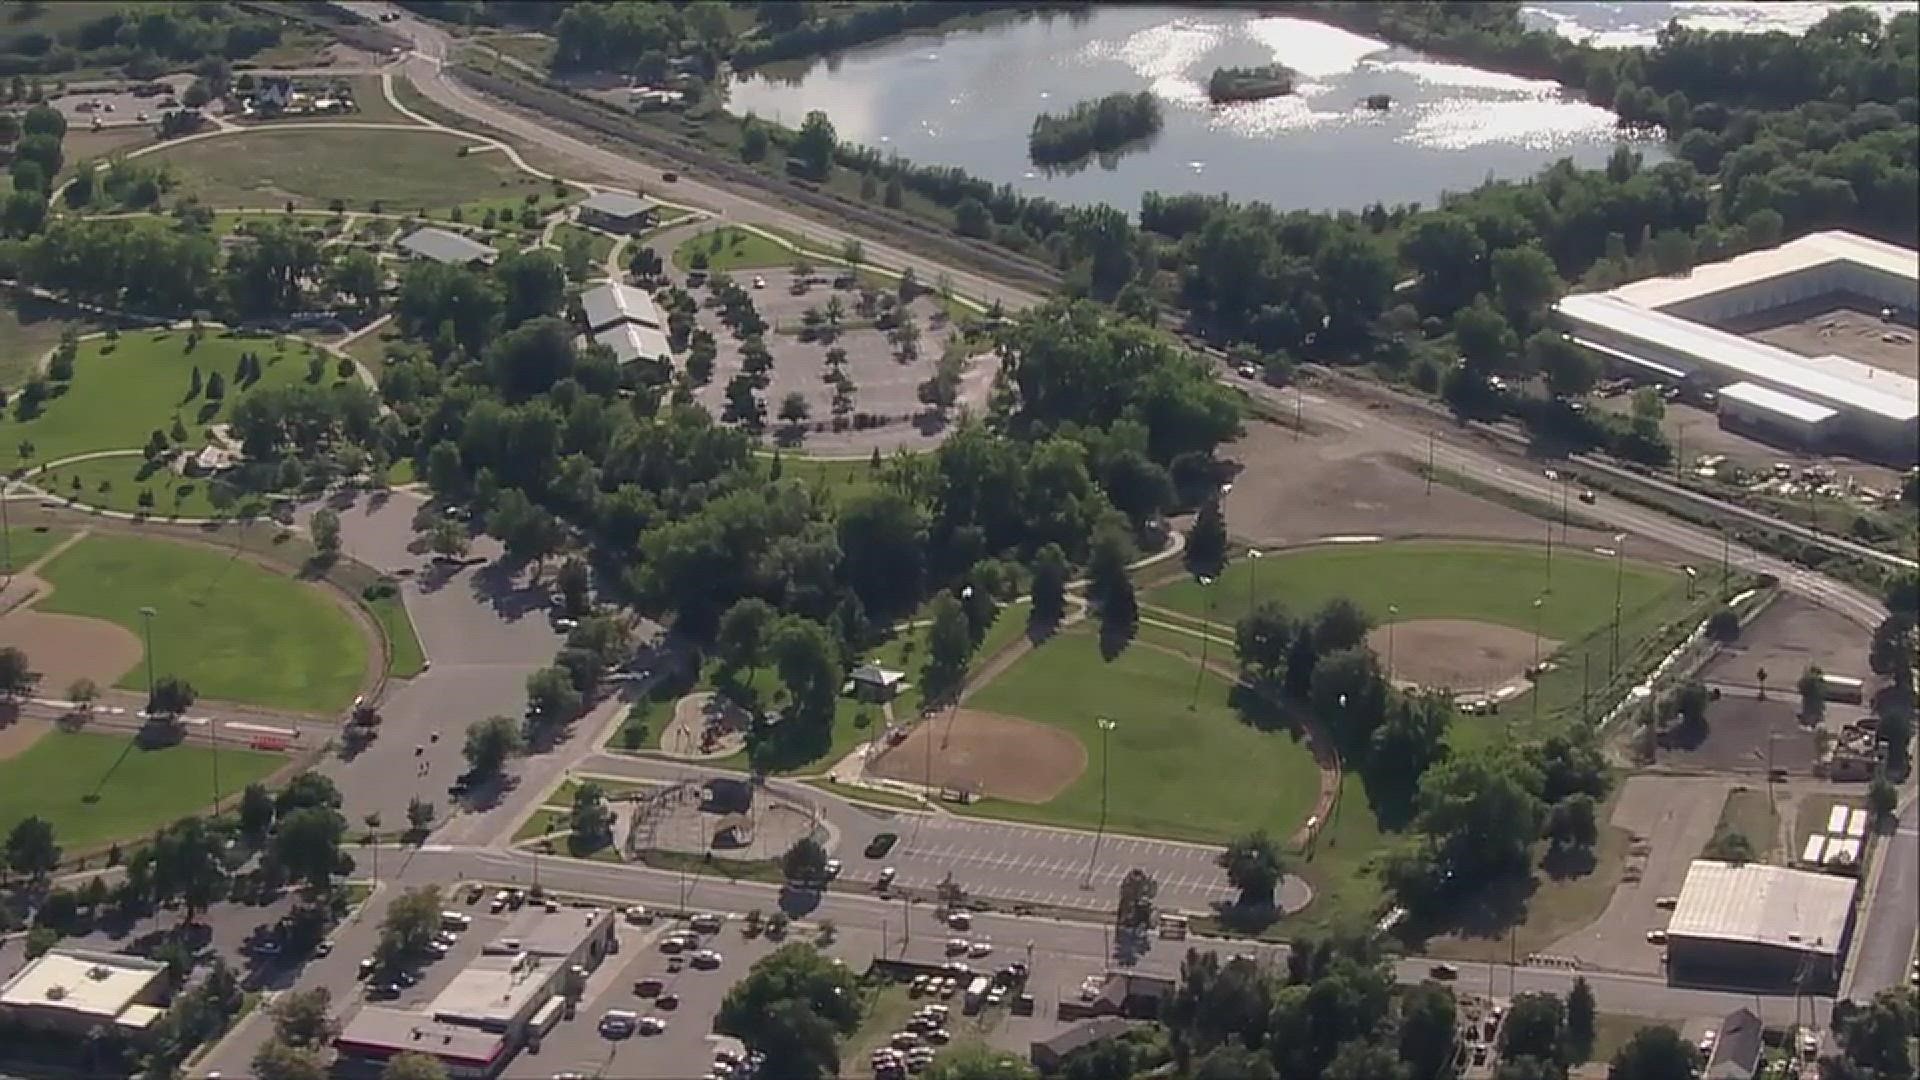 Officers found a woman unresponsive in a river near Barnes Park Monday morning, Loveland Police said.